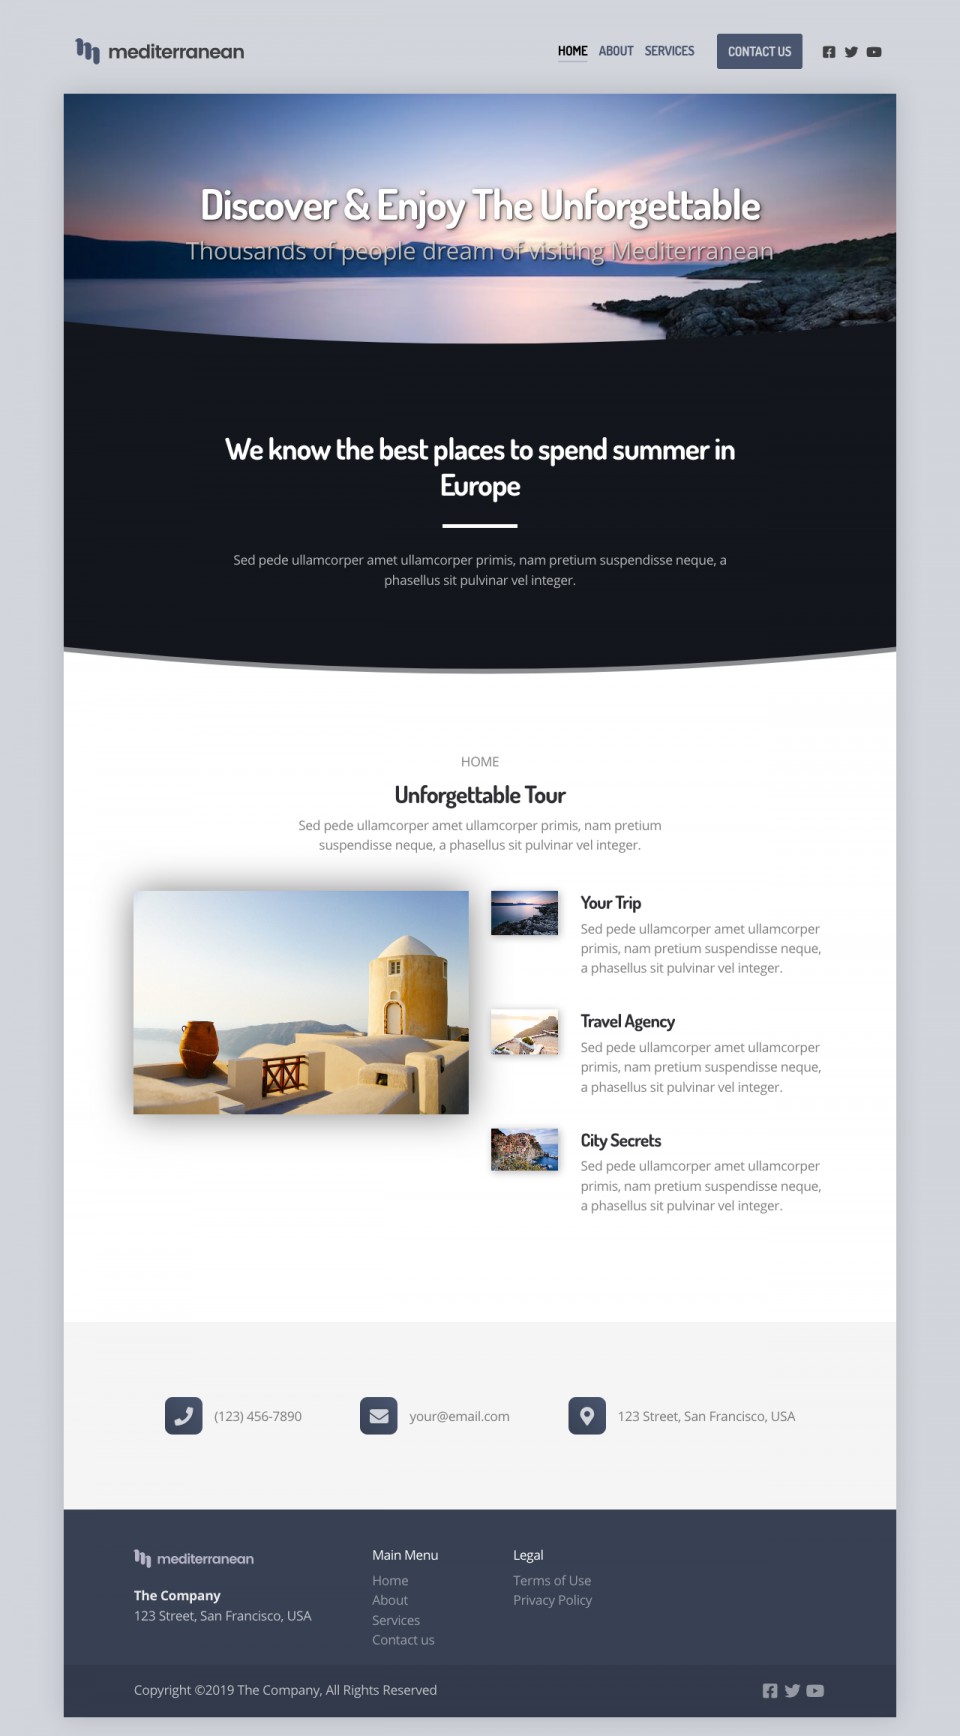 Mediterranean Website Template - Ideal for small businesses in the travel, vacation, and tourism sectors looking to establish a strong online presence.